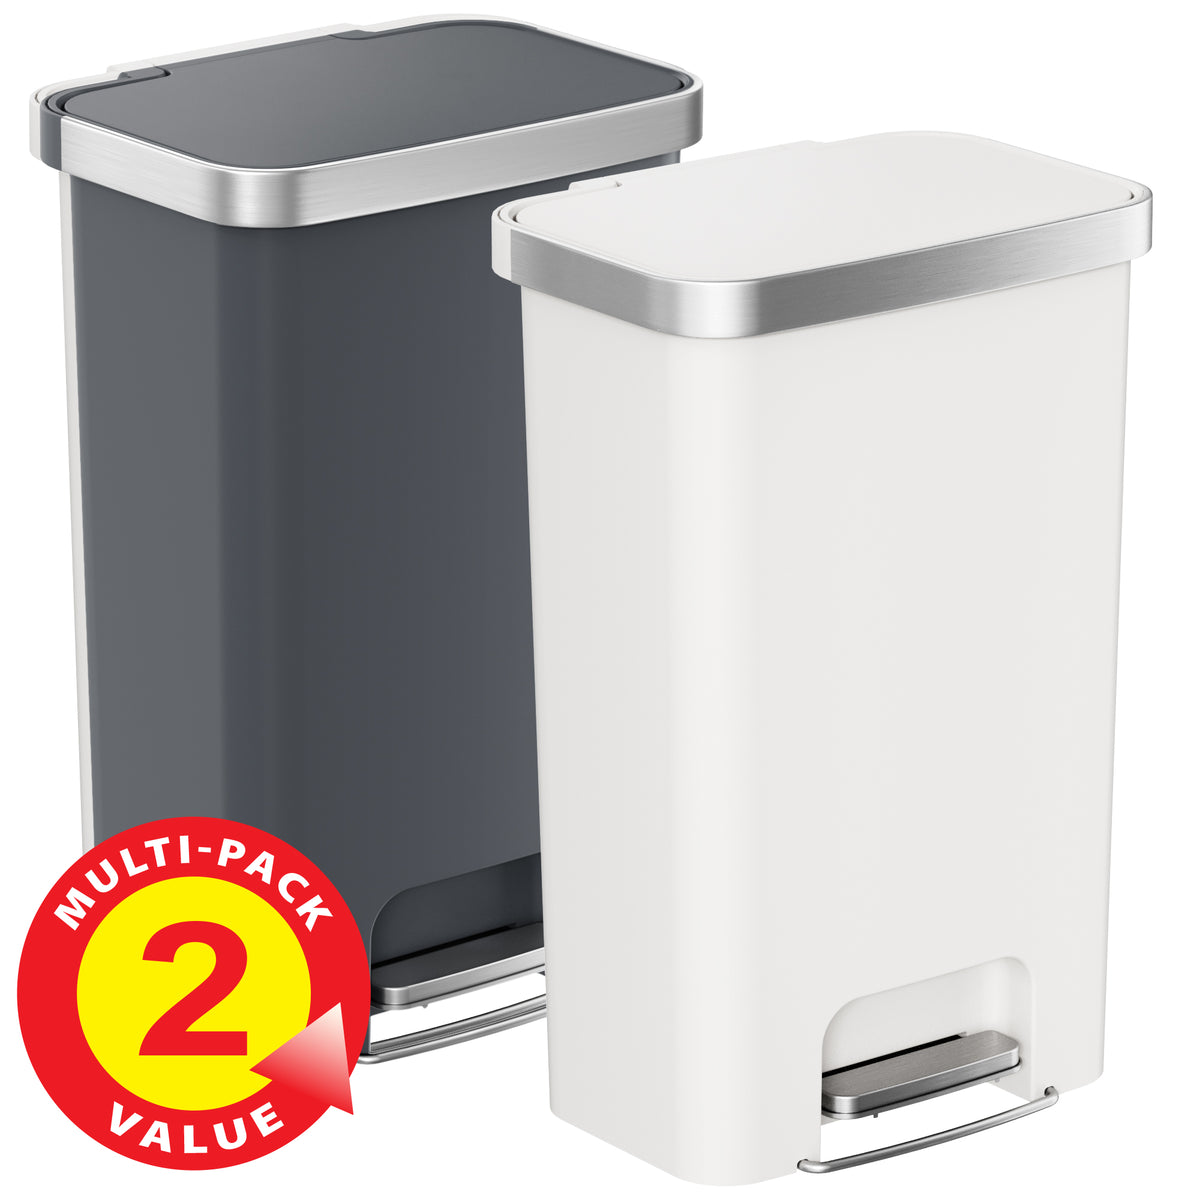 13.2 Gallon / 50 Liter SoftStep Prime Step Pedal Trash Can (Gray and White) - 2-PACK